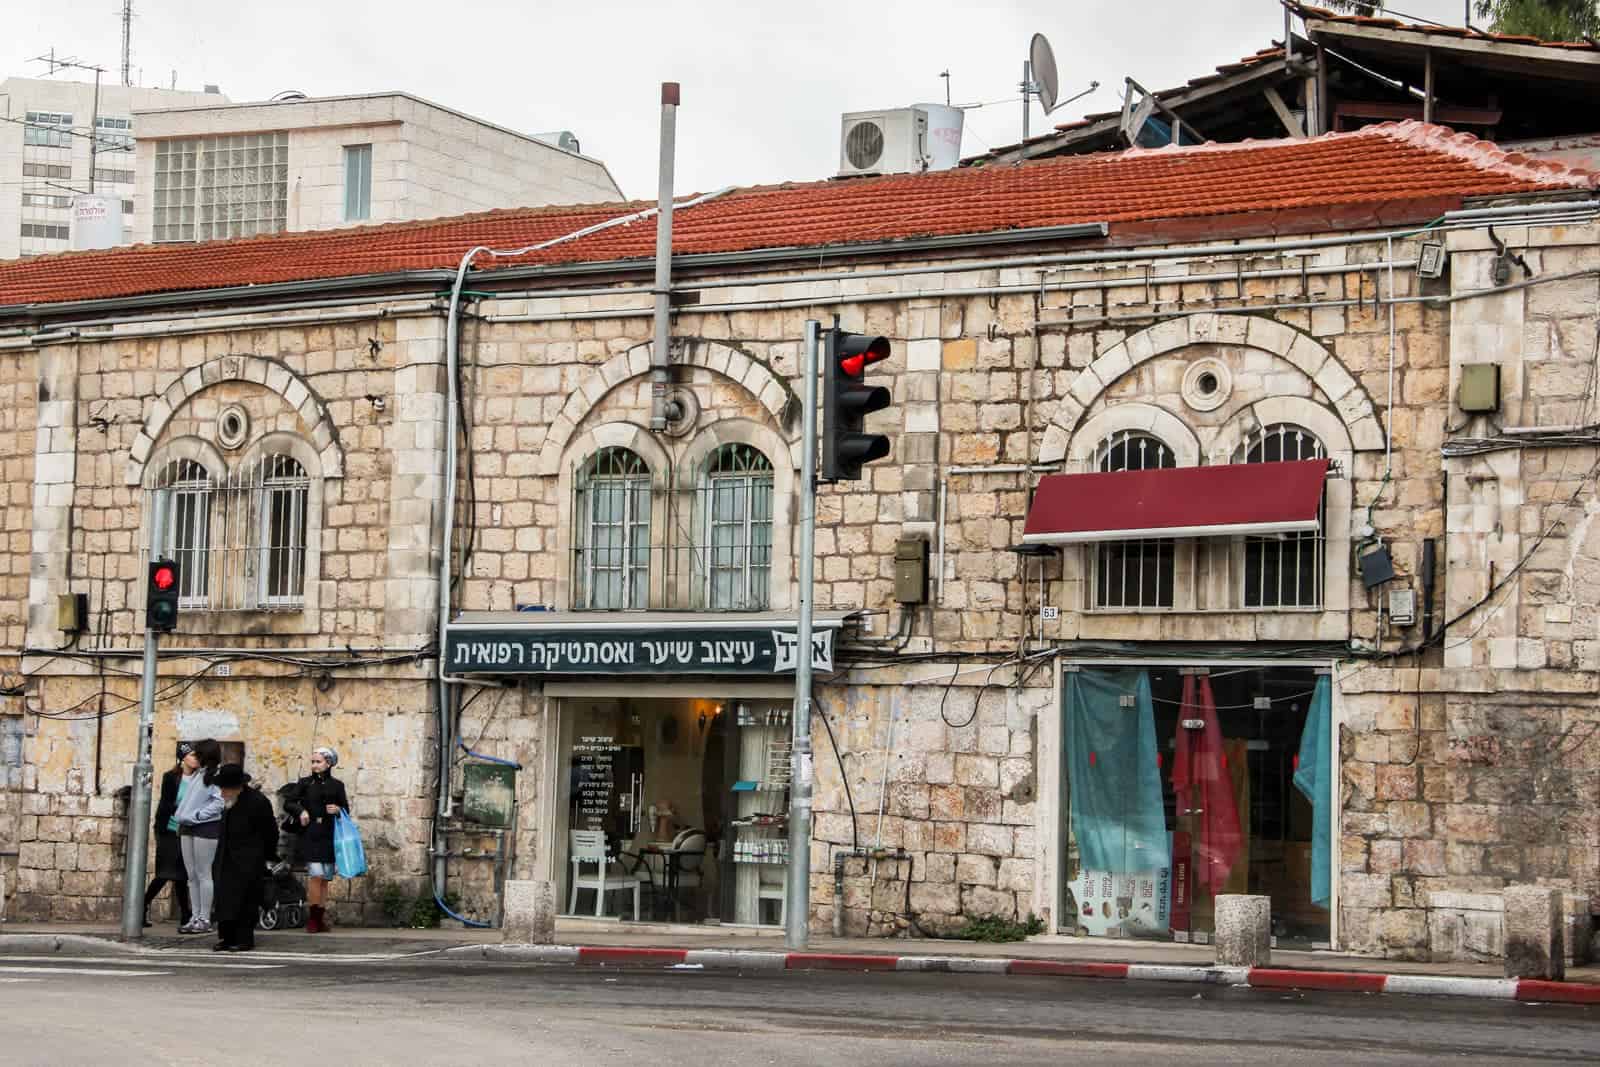 A honey coloured stone building, with terracota roof tiles and a open store front on Jaffa Road in Jerusalem city